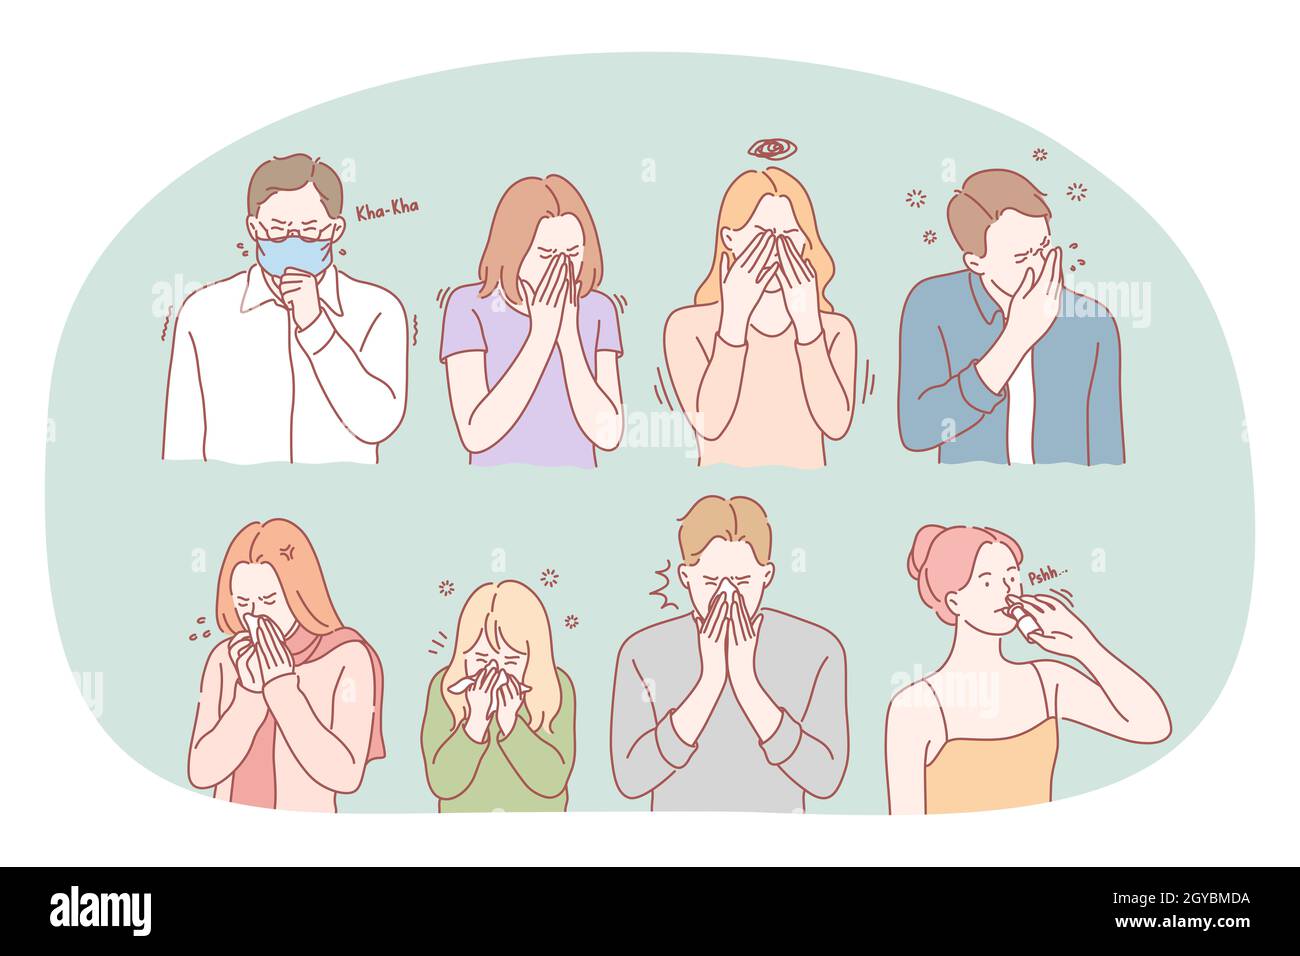 Cold, flu, feeling ill and infection concept. Unhappy sick people cartoon characters coughing and sneezing and feeling bad. Influenza, virus, fever, c Stock Photo